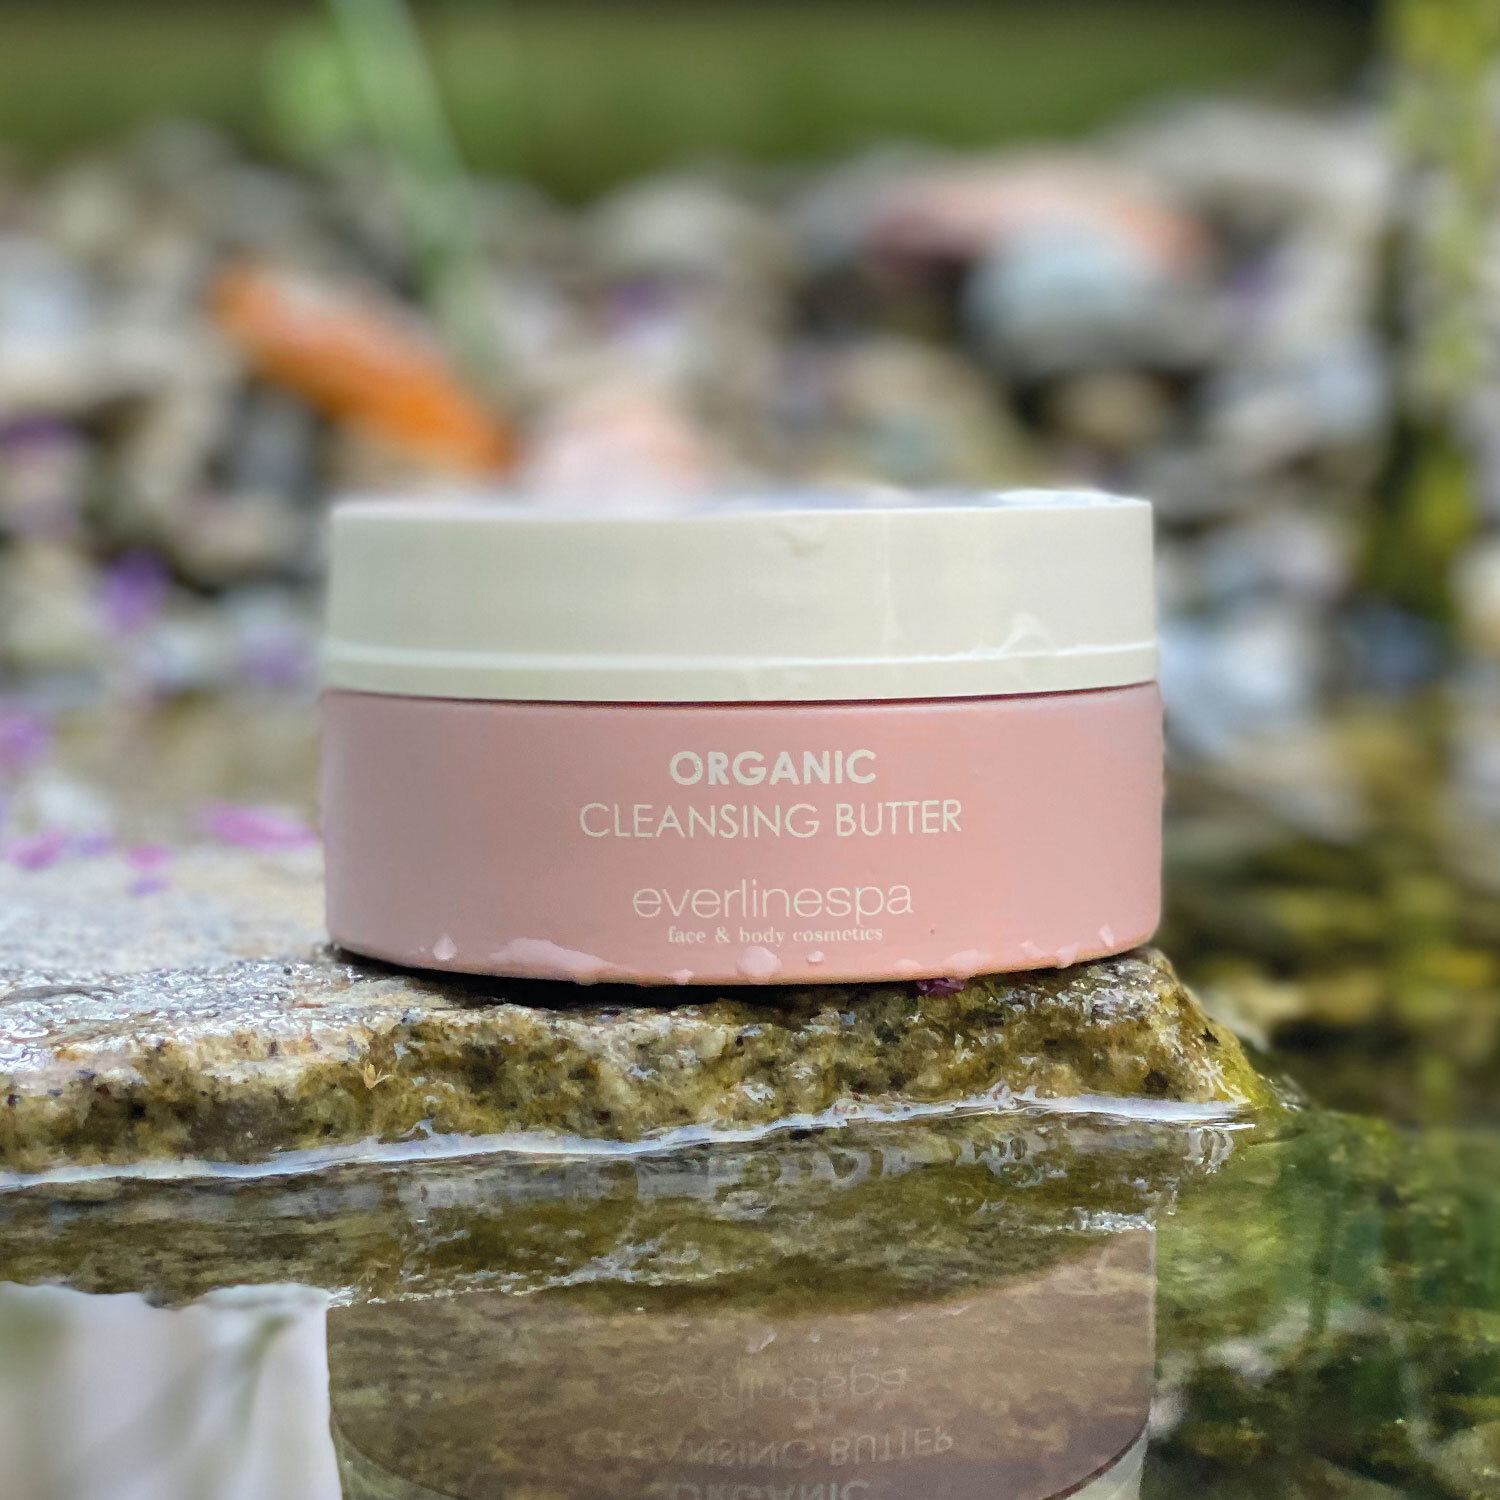 ORGANIC CLEANSING BUTTER